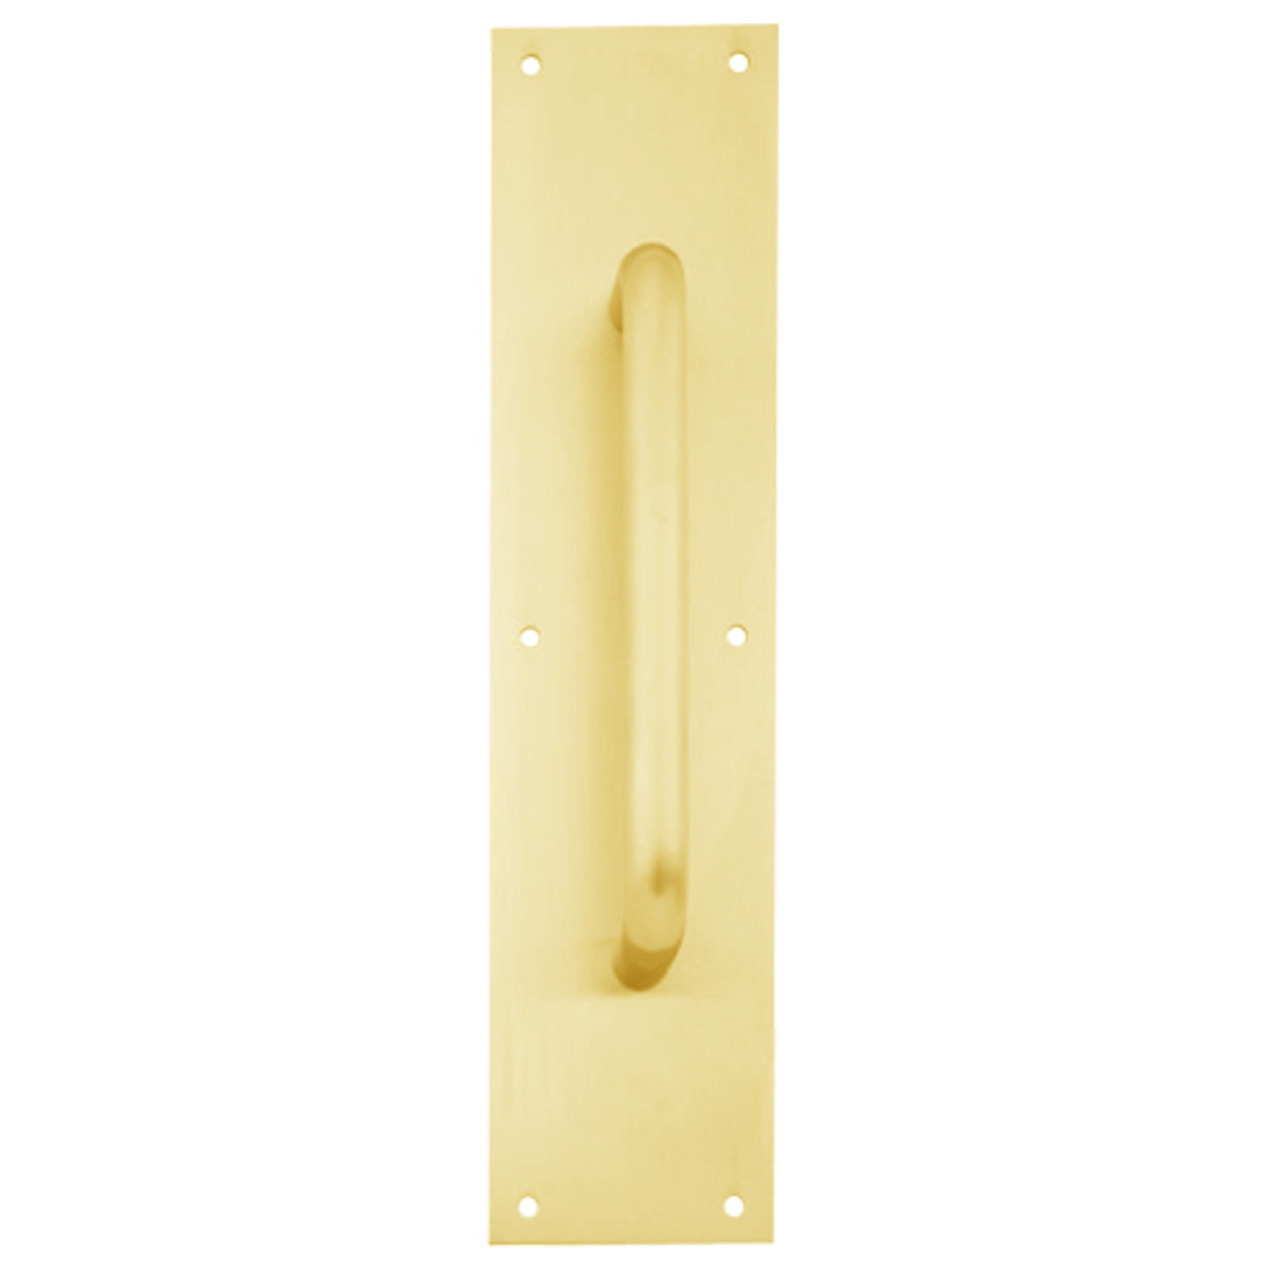 8302-6-US3-6x16 IVES Architectural Door Trim 6x16 Inch Pull Plate in Bright Brass